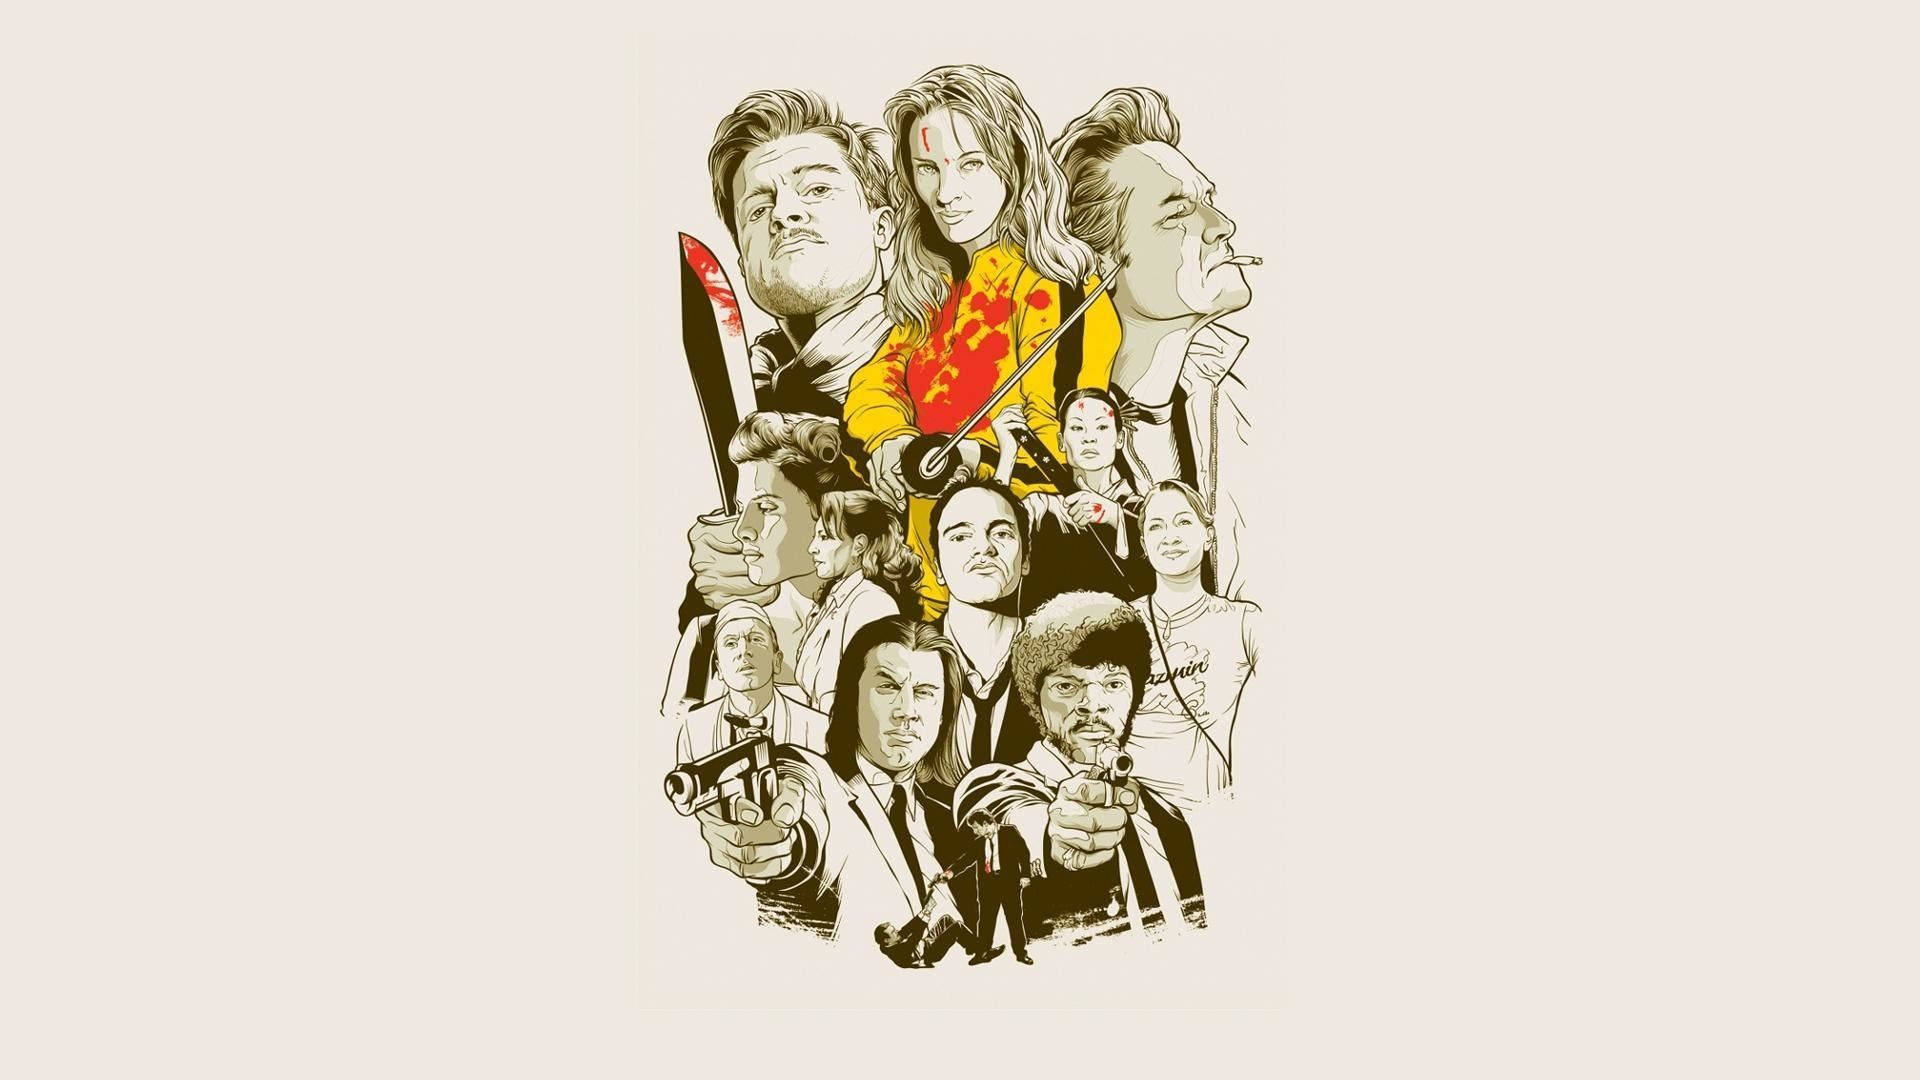 Artistic Caricature Illustration Inspired By Quentin Tarantino's Iconic Movie Pulp Fiction